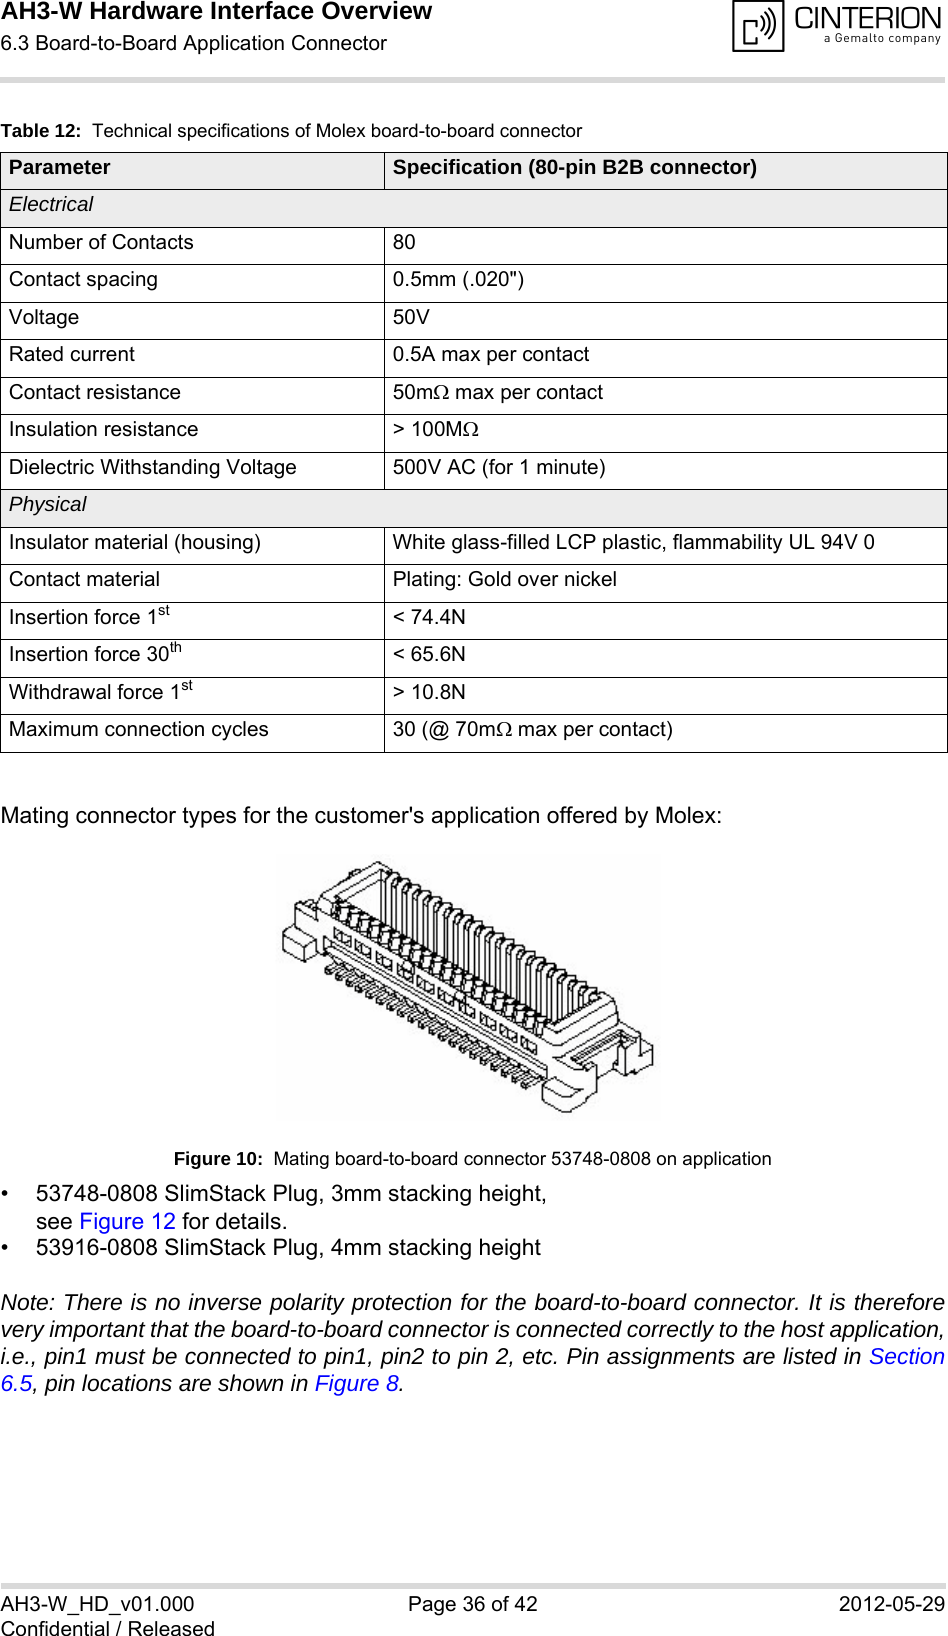 AH3-W Hardware Interface Overview6.3 Board-to-Board Application Connector38AH3-W_HD_v01.000 Page 36 of 42 2012-05-29Confidential / ReleasedMating connector types for the customer&apos;s application offered by Molex:Figure 10:  Mating board-to-board connector 53748-0808 on application• 53748-0808 SlimStack Plug, 3mm stacking height, see Figure 12 for details.• 53916-0808 SlimStack Plug, 4mm stacking heightNote: There is no inverse polarity protection for the board-to-board connector. It is thereforevery important that the board-to-board connector is connected correctly to the host application,i.e., pin1 must be connected to pin1, pin2 to pin 2, etc. Pin assignments are listed in Section6.5, pin locations are shown in Figure 8.Table 12:  Technical specifications of Molex board-to-board connectorParameter Specification (80-pin B2B connector)ElectricalNumber of Contacts 80Contact spacing 0.5mm (.020&quot;)Voltage 50VRated current 0.5A max per contactContact resistance 50m max per contactInsulation resistance &gt; 100MDielectric Withstanding Voltage 500V AC (for 1 minute)PhysicalInsulator material (housing) White glass-filled LCP plastic, flammability UL 94V 0Contact material Plating: Gold over nickelInsertion force 1st &lt; 74.4NInsertion force 30th &lt; 65.6NWithdrawal force 1st &gt; 10.8NMaximum connection cycles 30 (@ 70m max per contact)